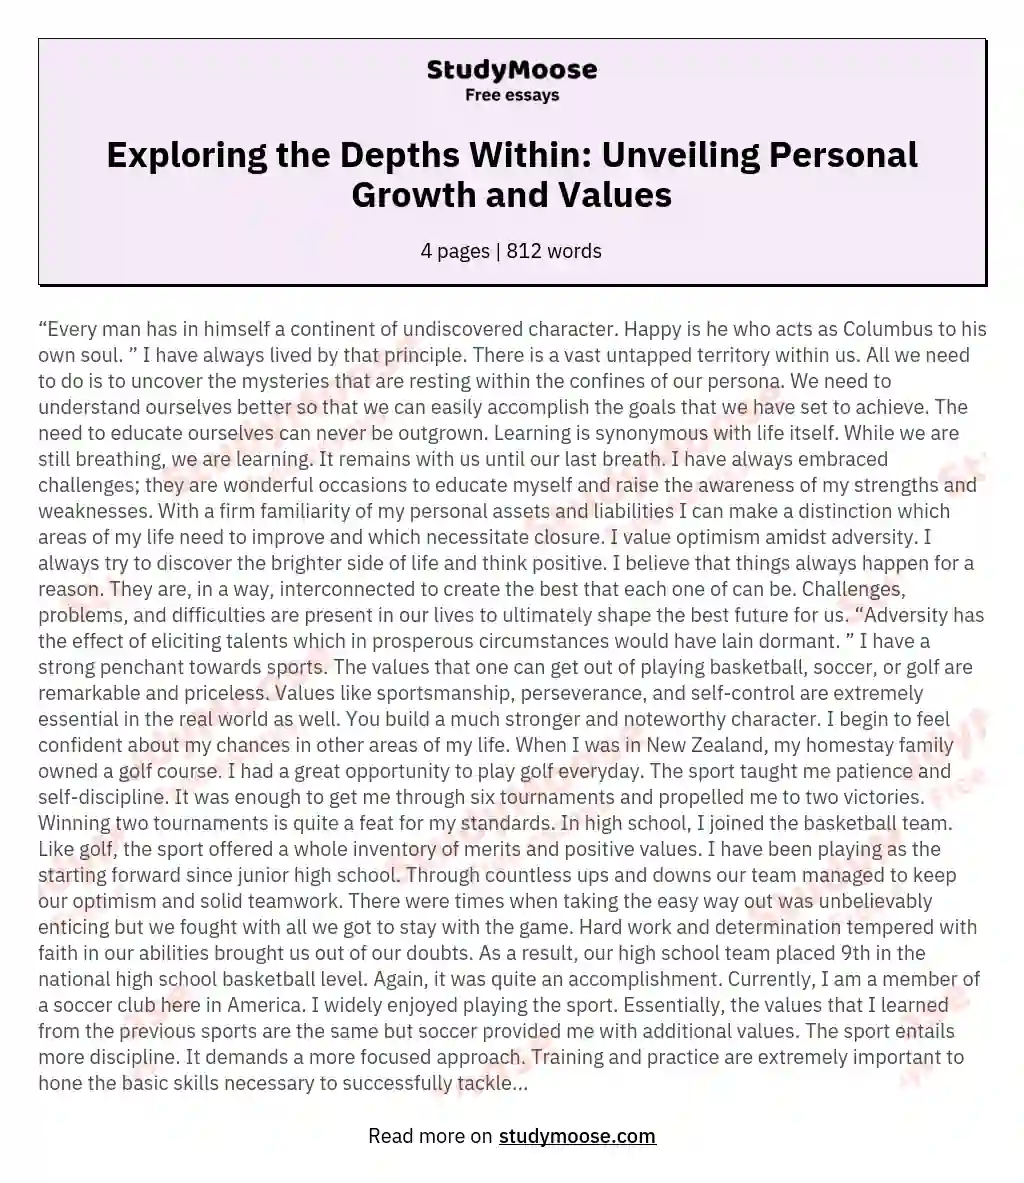 Exploring the Depths Within: Unveiling Personal Growth and Values essay